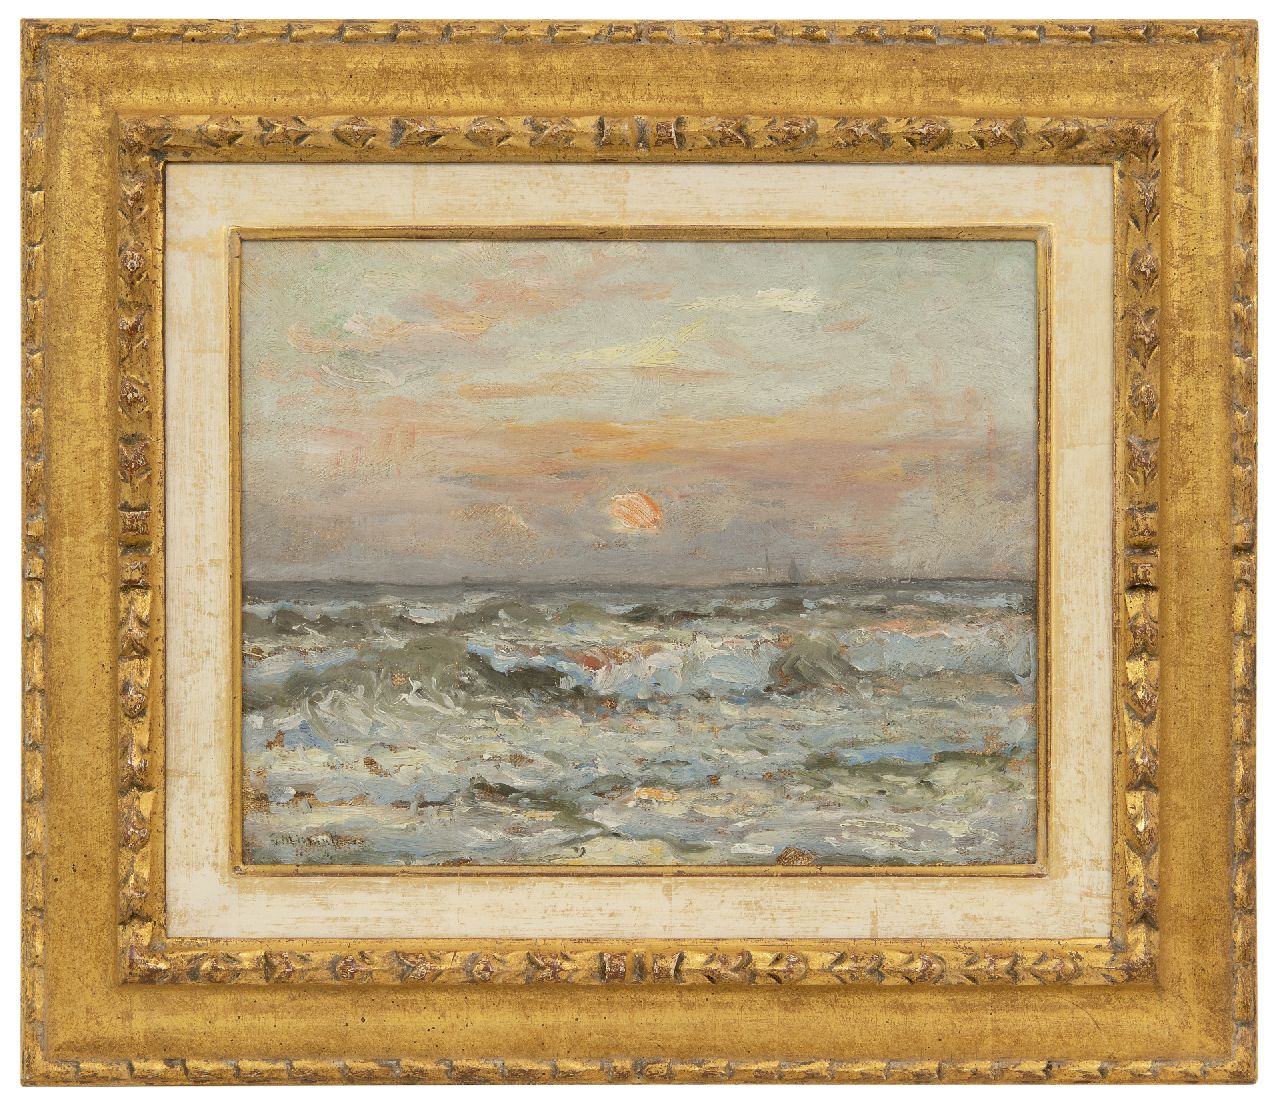 Munthe G.A.L.  | Gerhard Arij Ludwig 'Morgenstjerne' Munthe | Paintings offered for sale | Seascape with setting sun, oil on canvas laid down on panel 24.4 x 30.4 cm, signed l.l. and dated '14